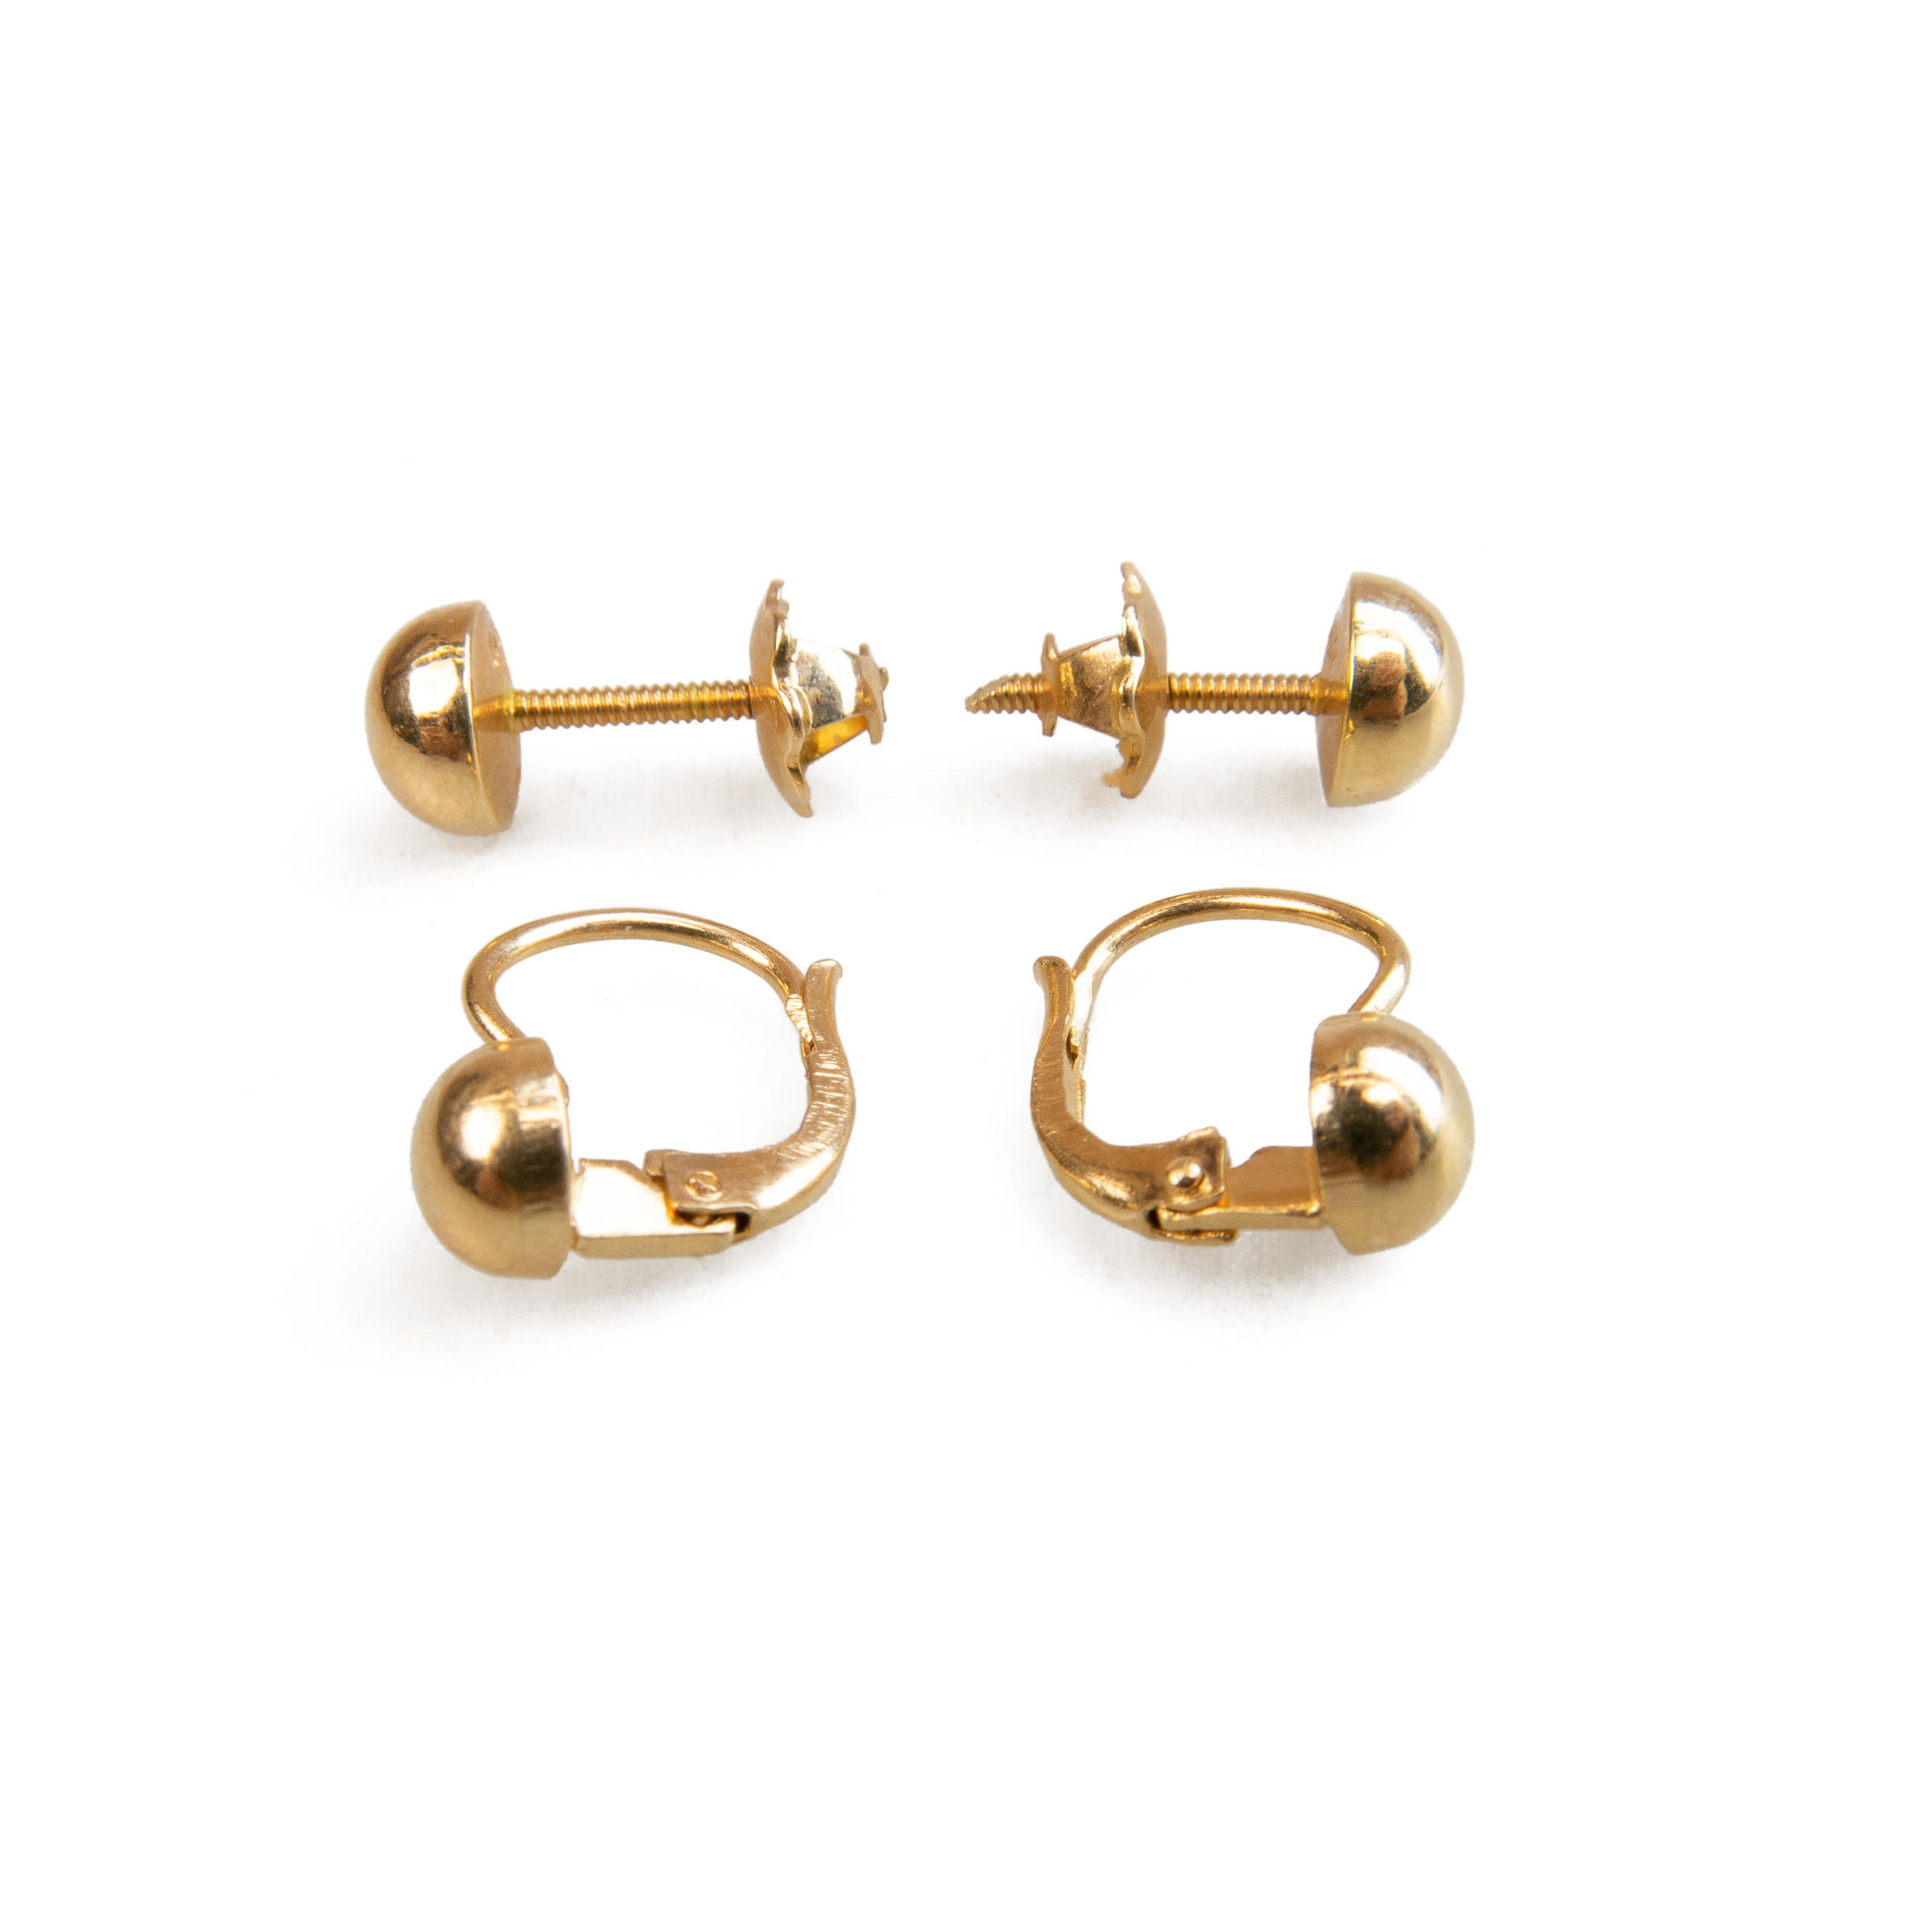 25 x Pairs Of 18k Yellow Gold Earrings